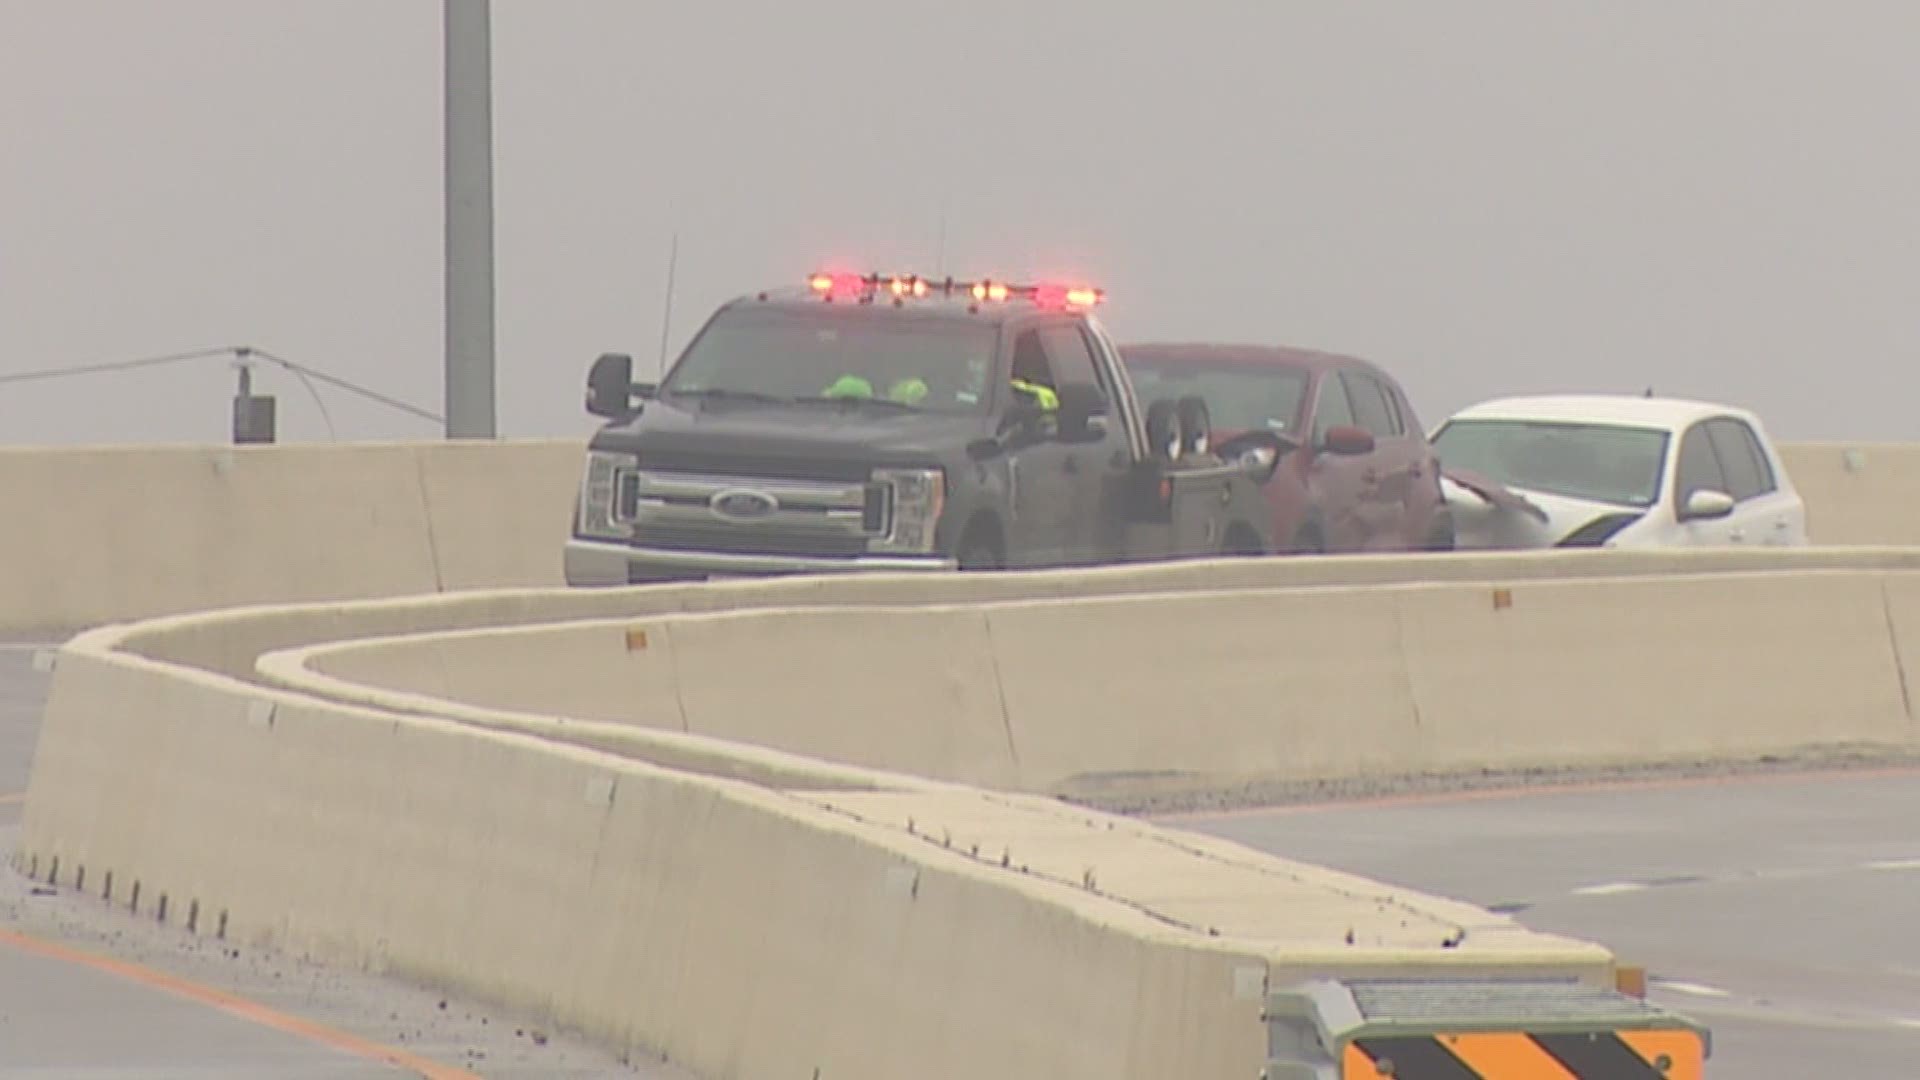 Ten vehicles were involved in a crash on an overpass in Magnolia. Police said icy roads were to blame.